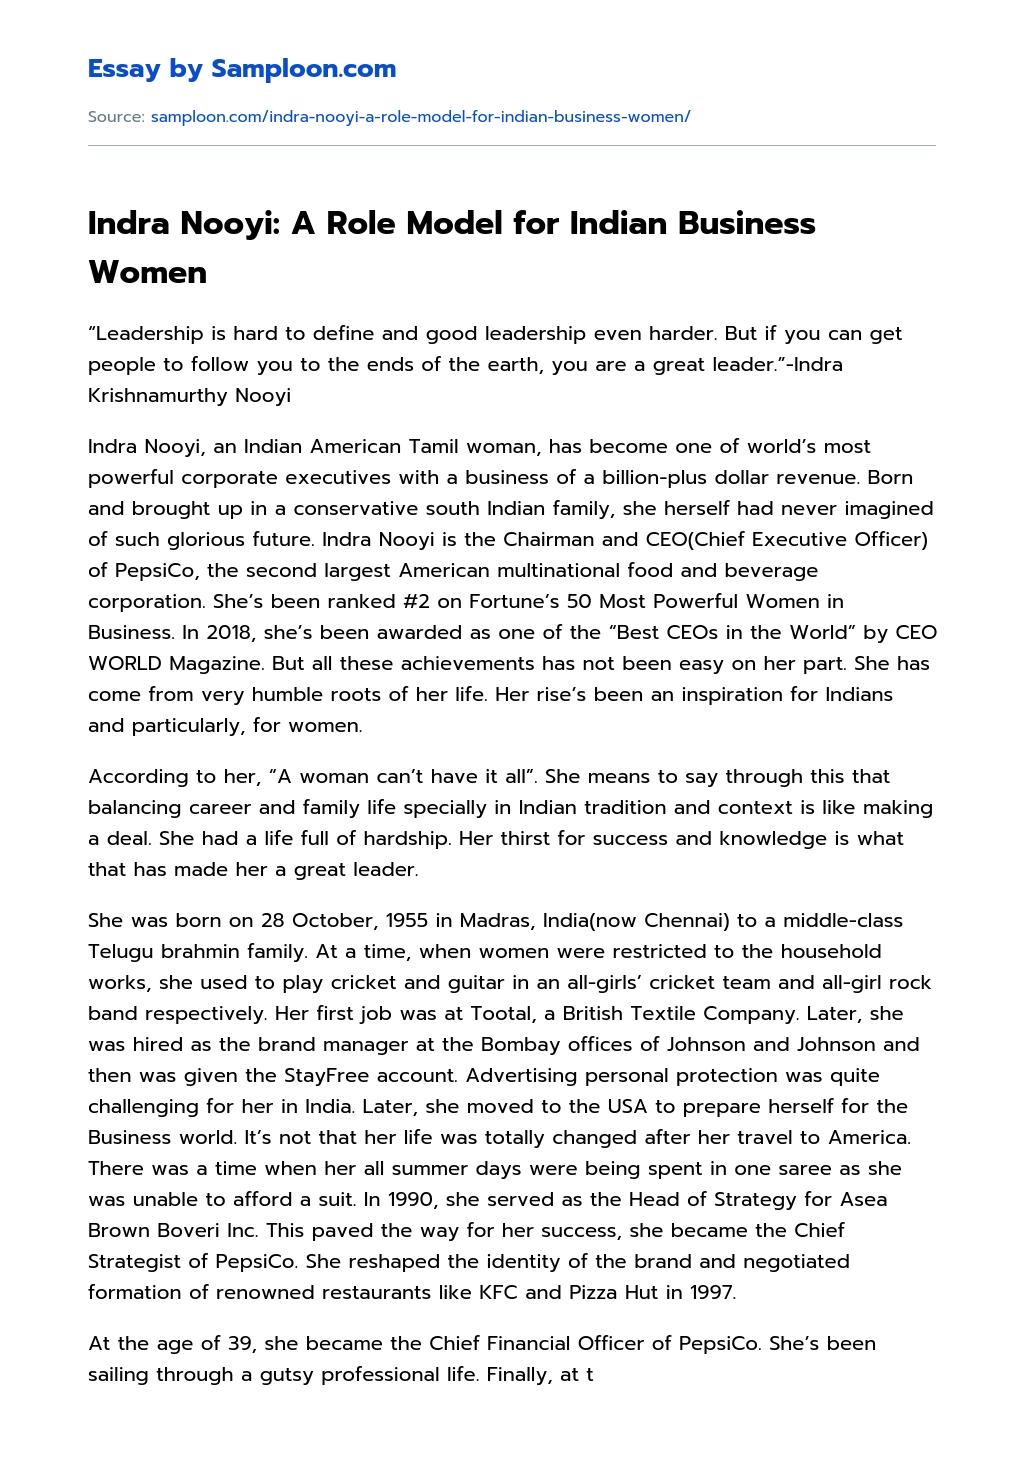 Indra Nooyi: A Role Model for Indian Business Women essay